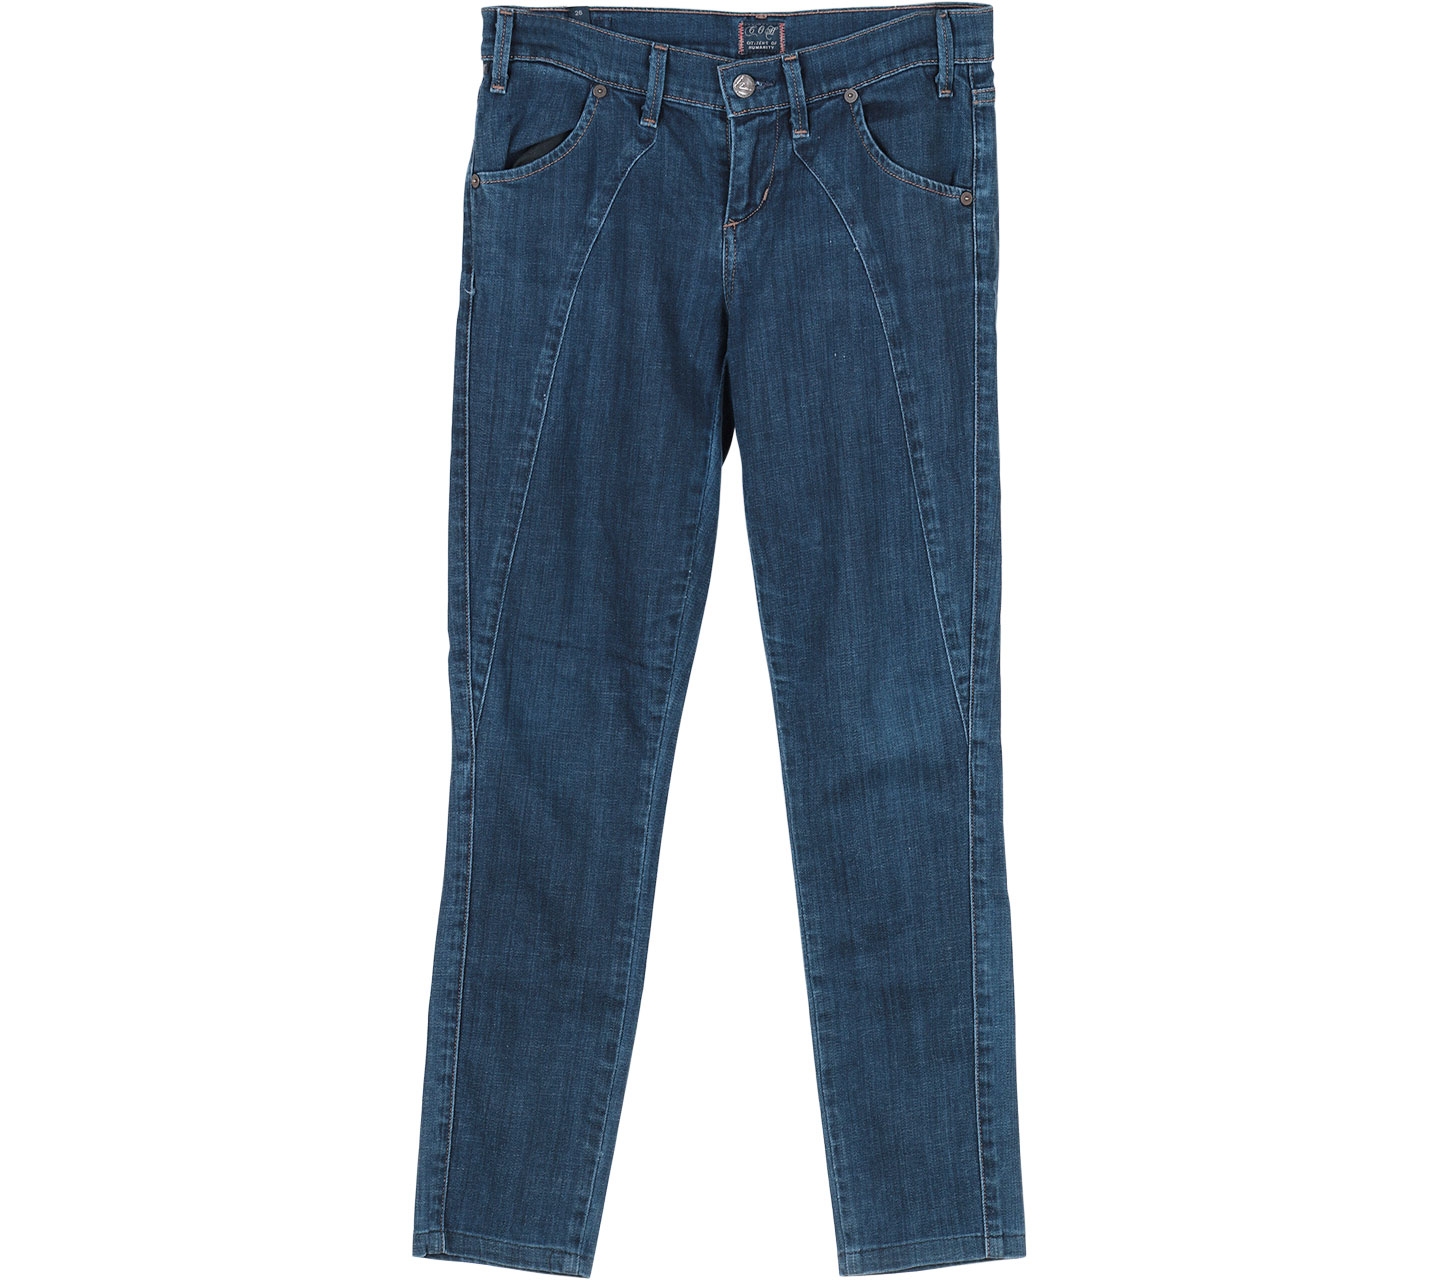 Citizens of Humanity Blue Jeans Pants